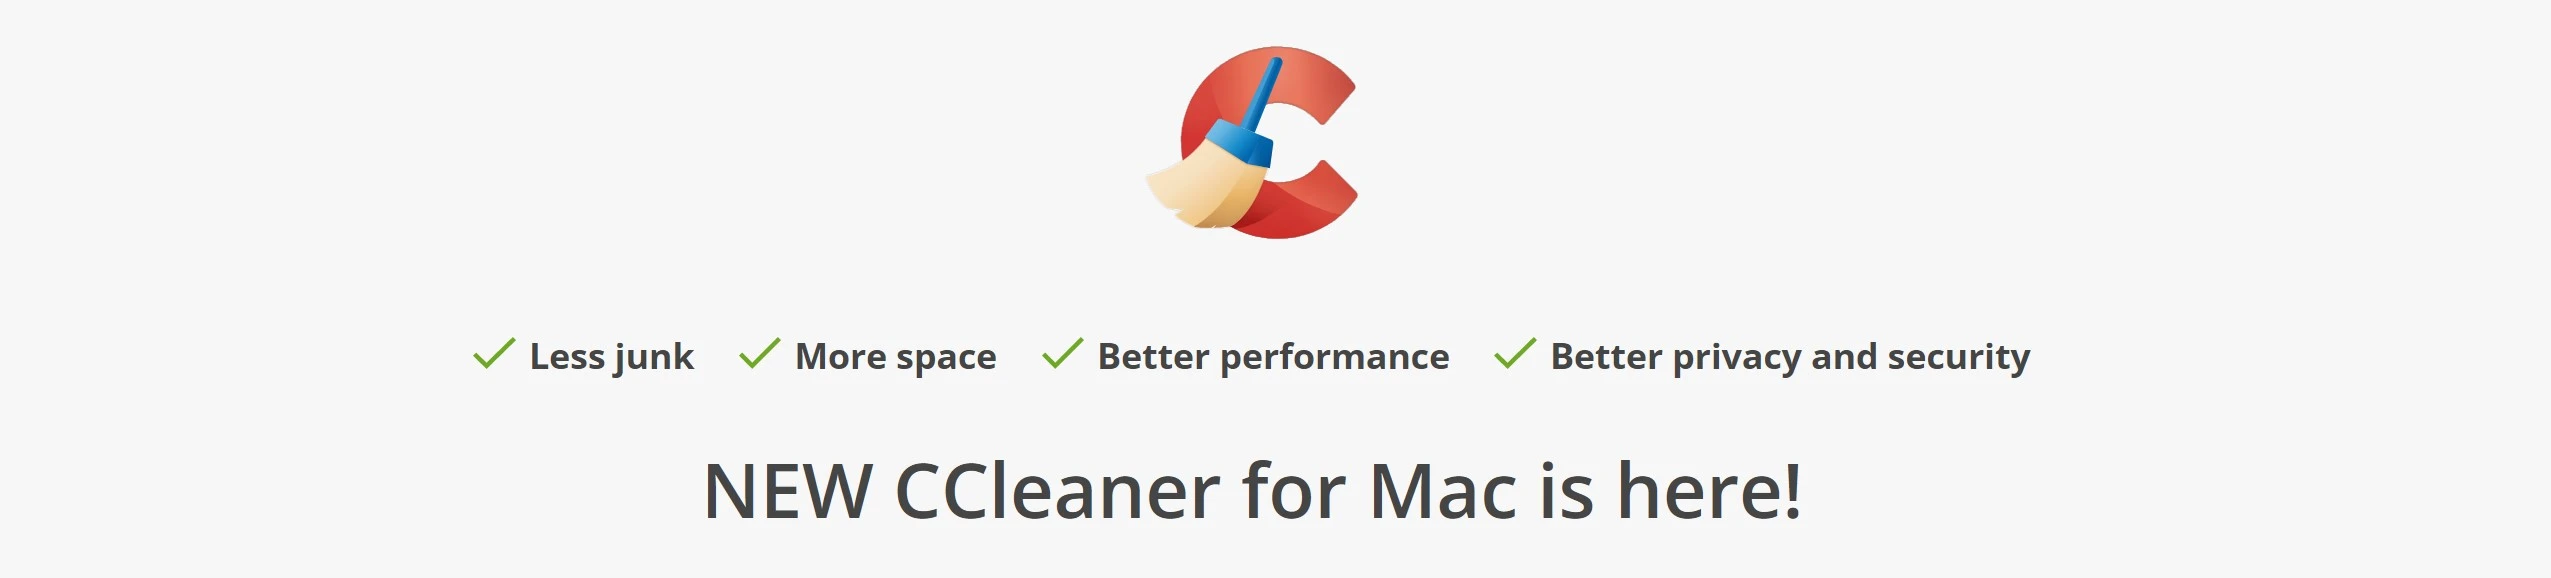 CCleaner Features For Mac